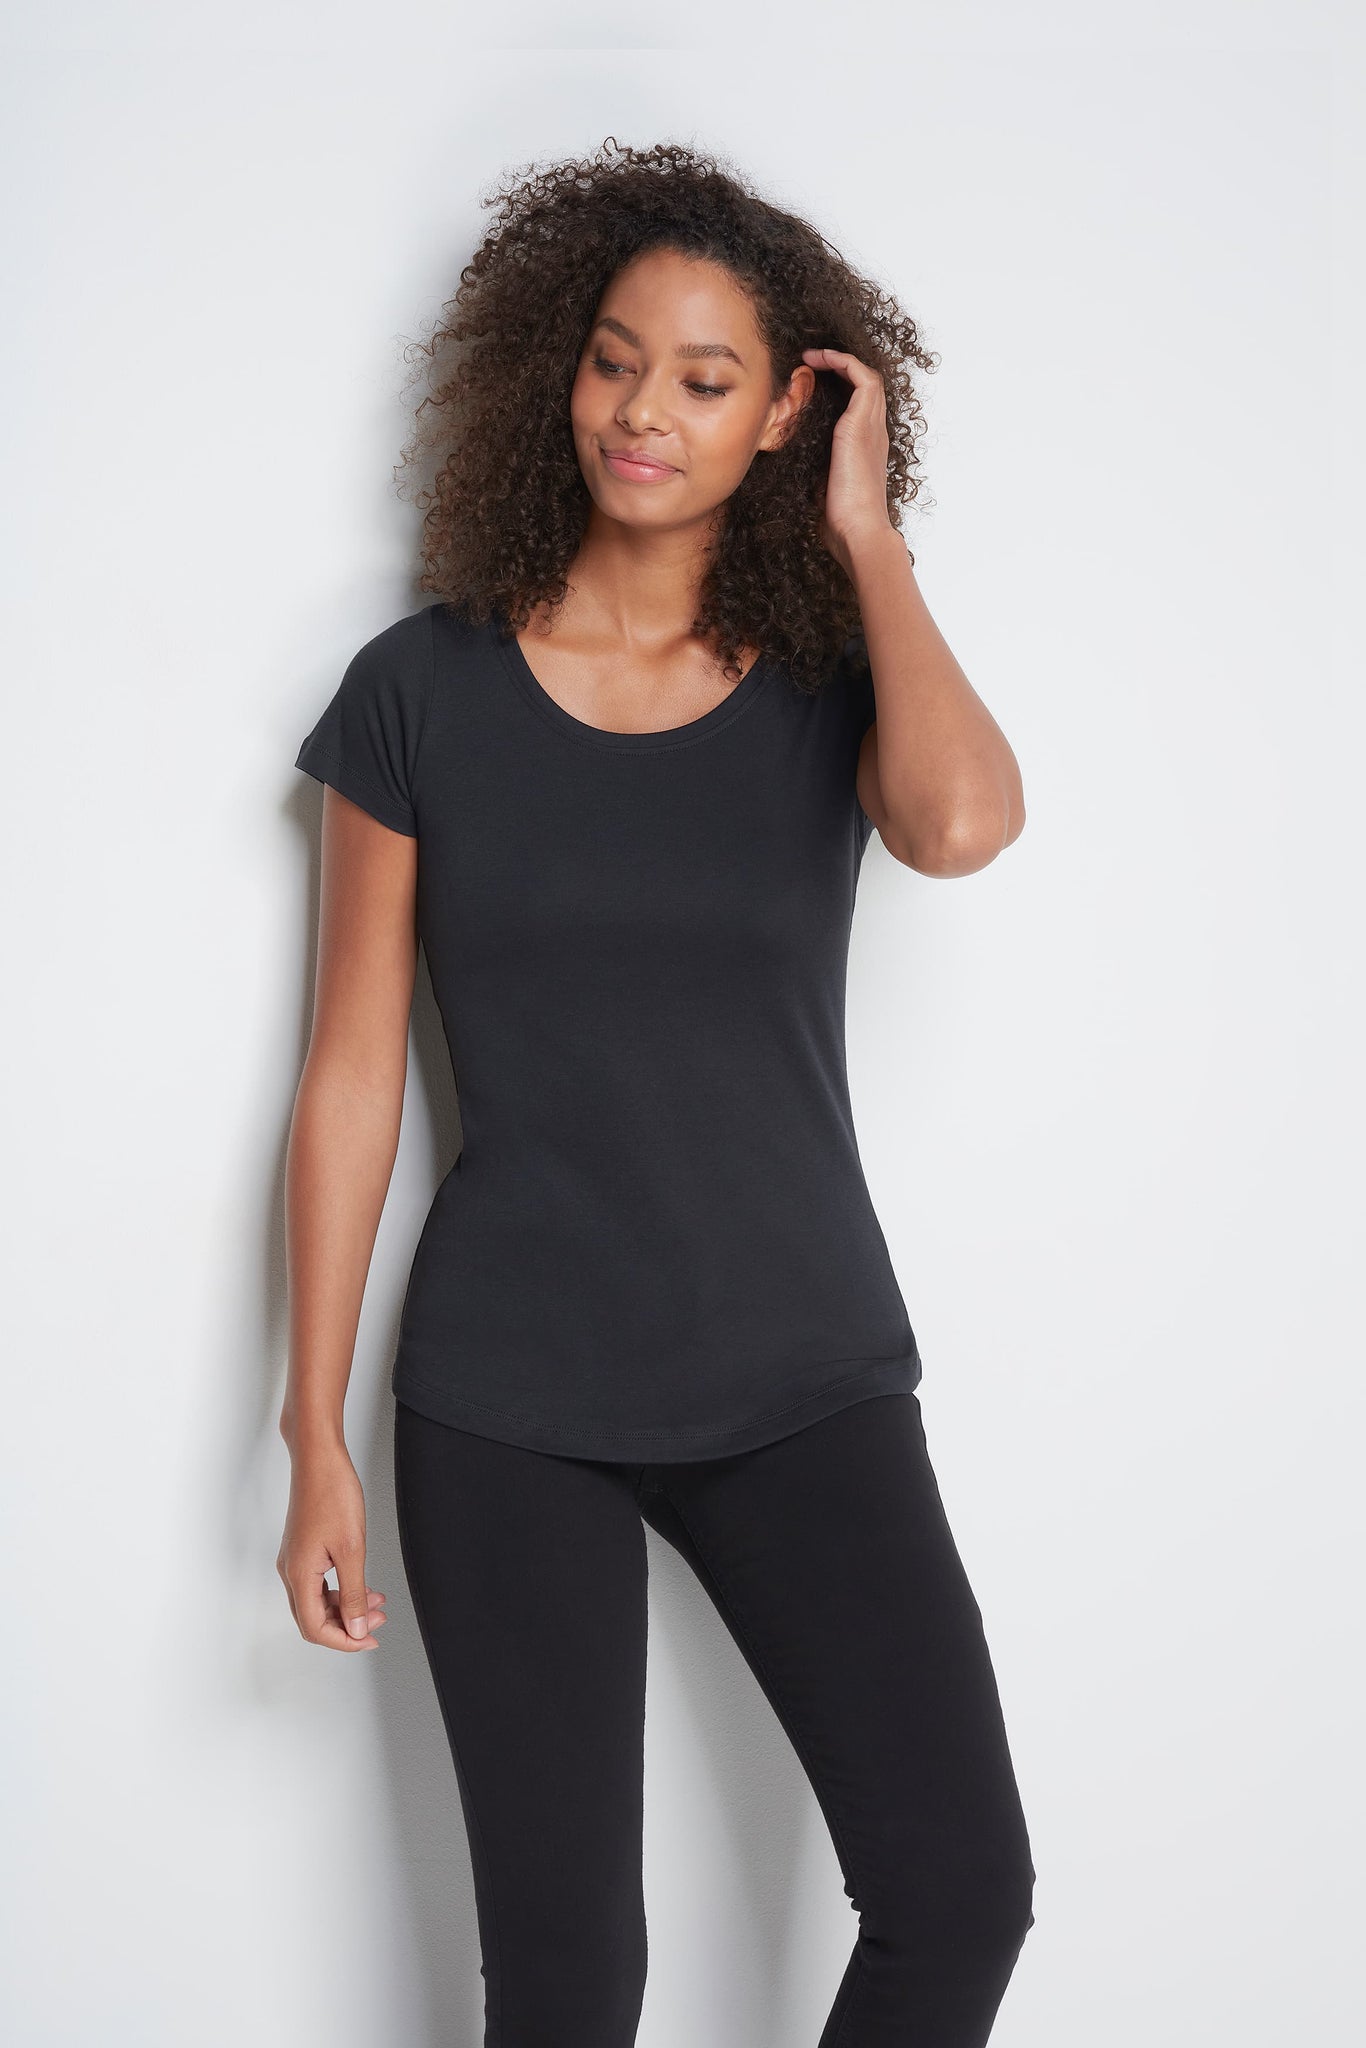 Women's Quality Scoop Neck Cotton Modal Blend T-shirt in Black - Comfortable T-shirt - Essential Short Sleeve T-shirt by Lavender Hill Clothing